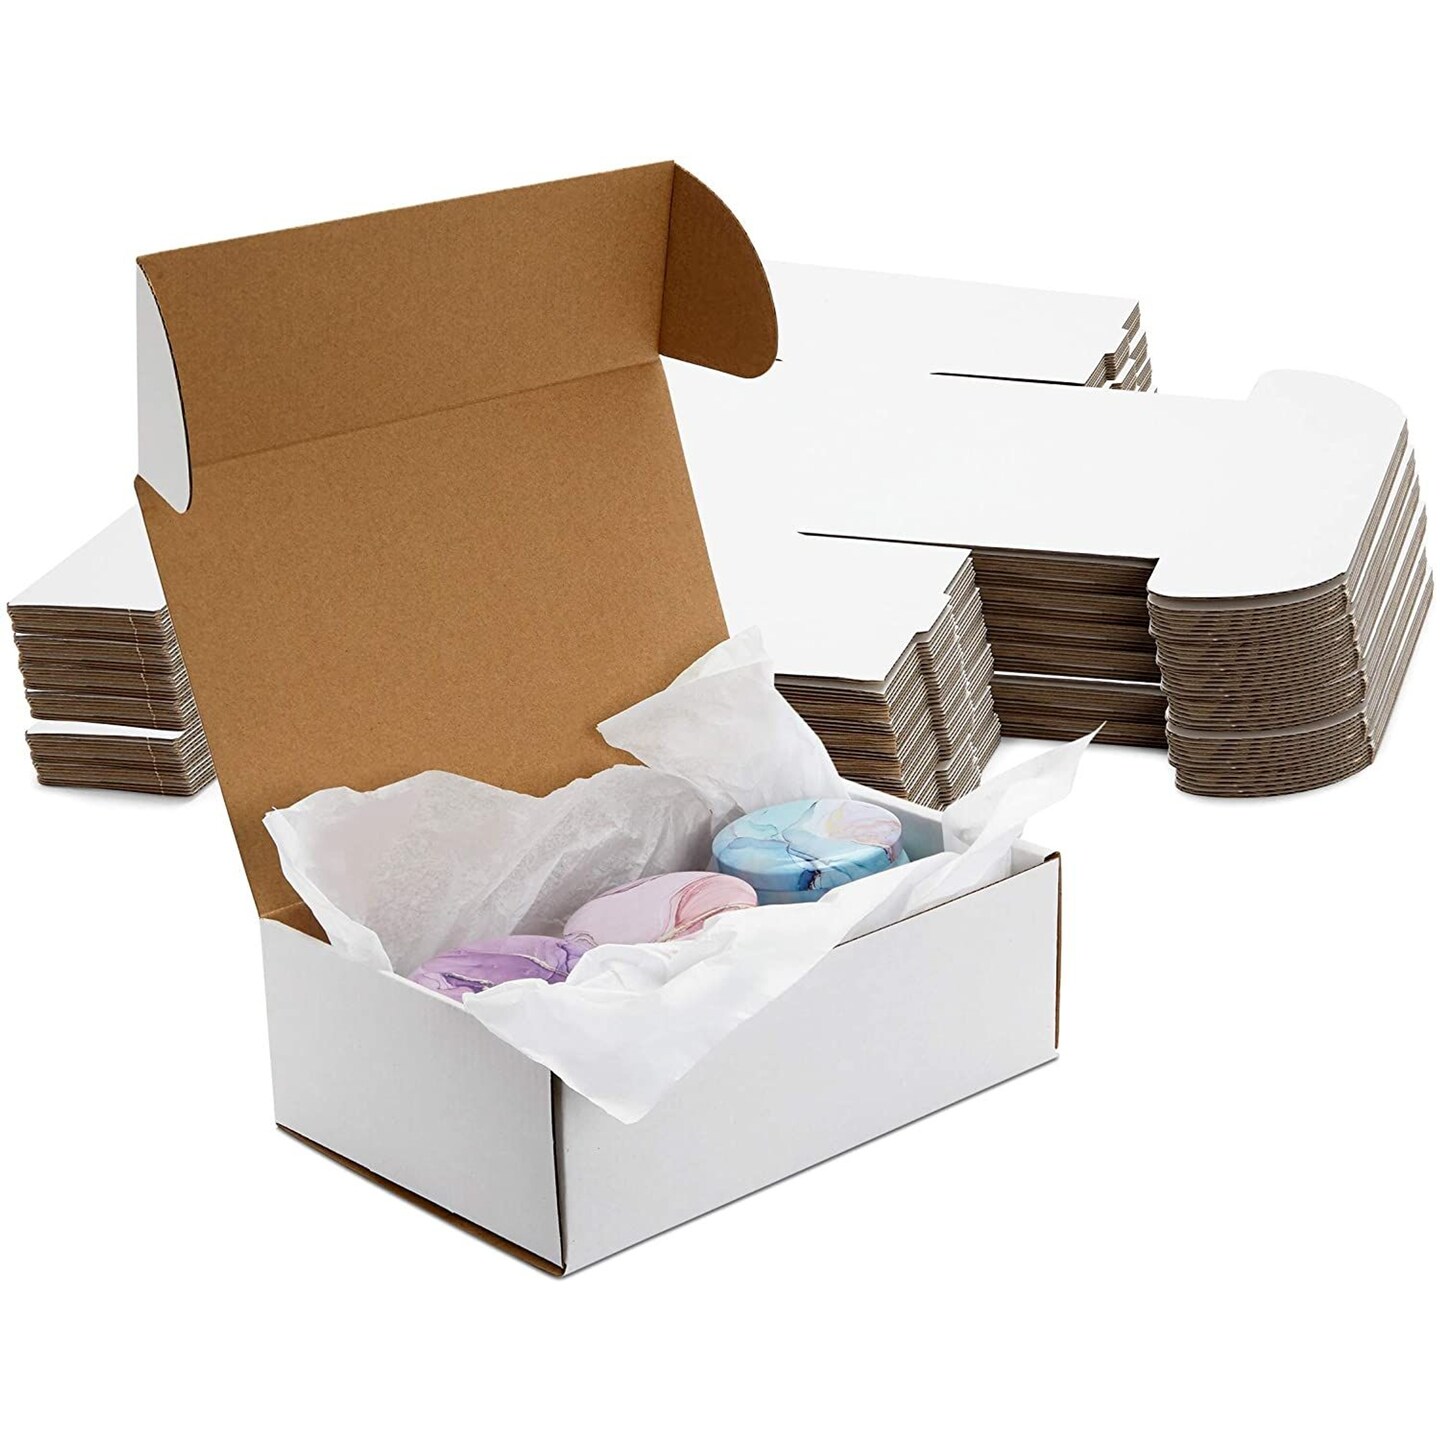 Pack and Move like a Pro. / Pricing for Business Boxes